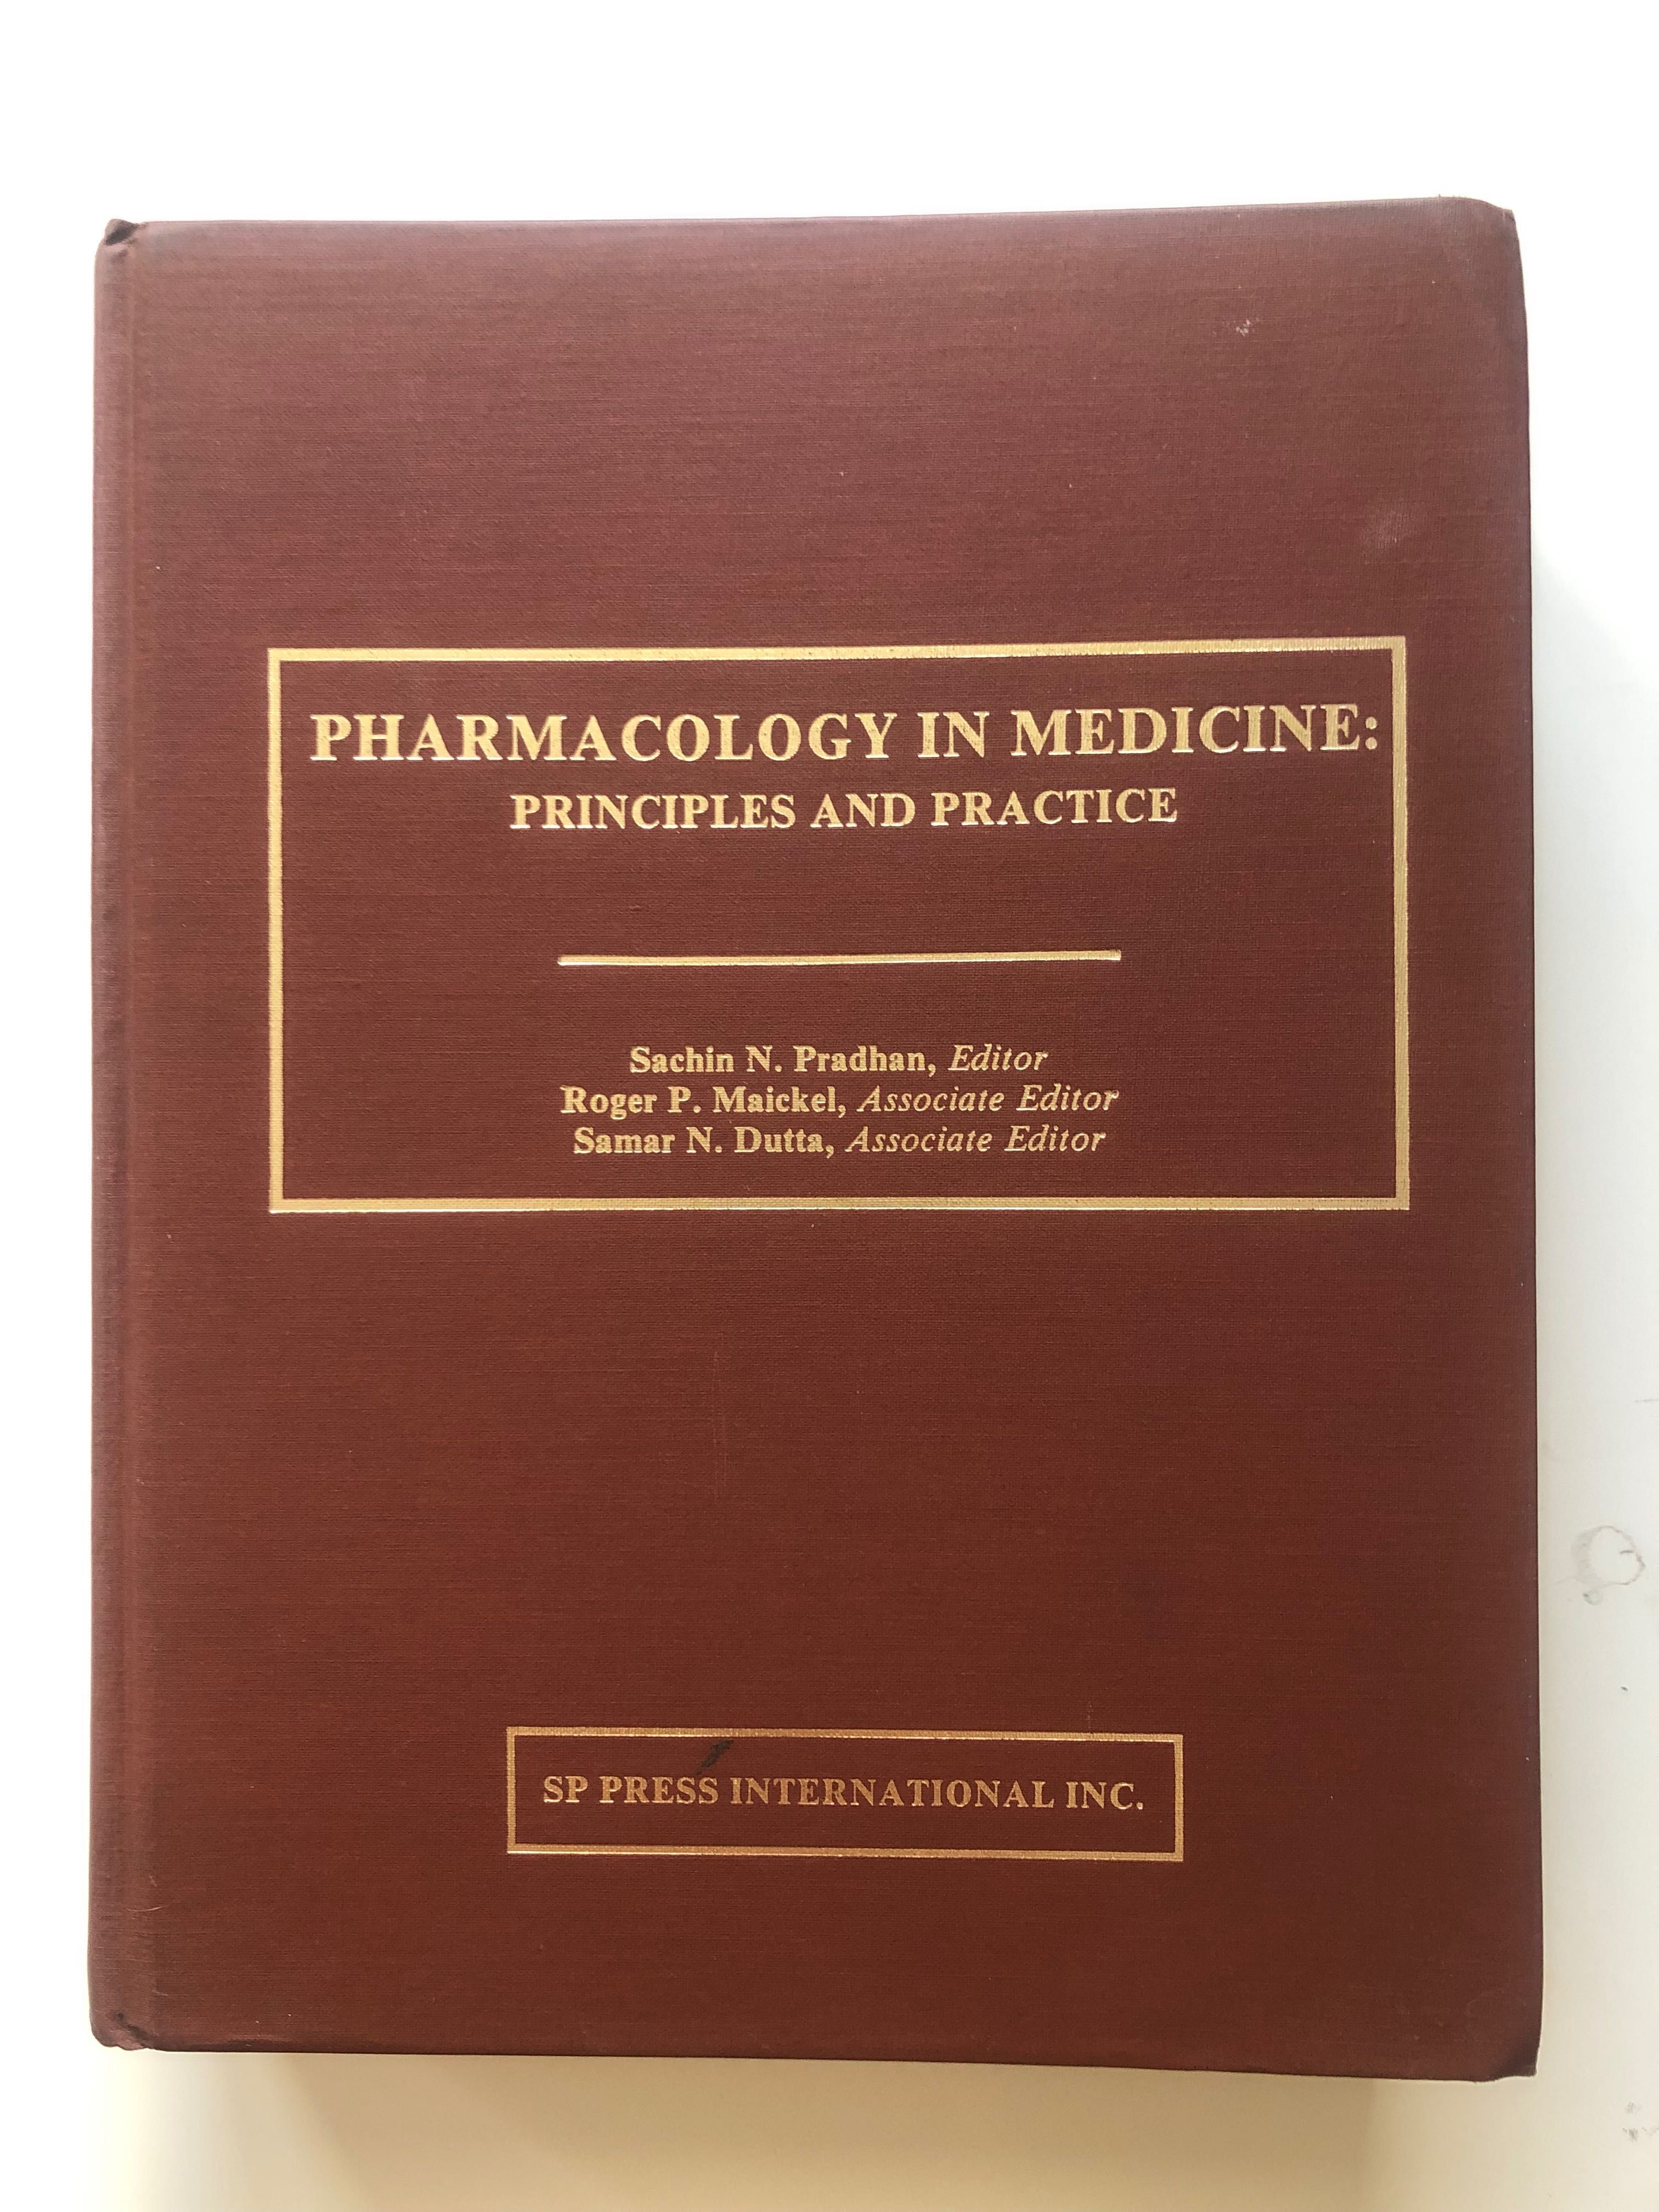 Pharmacology in medicine